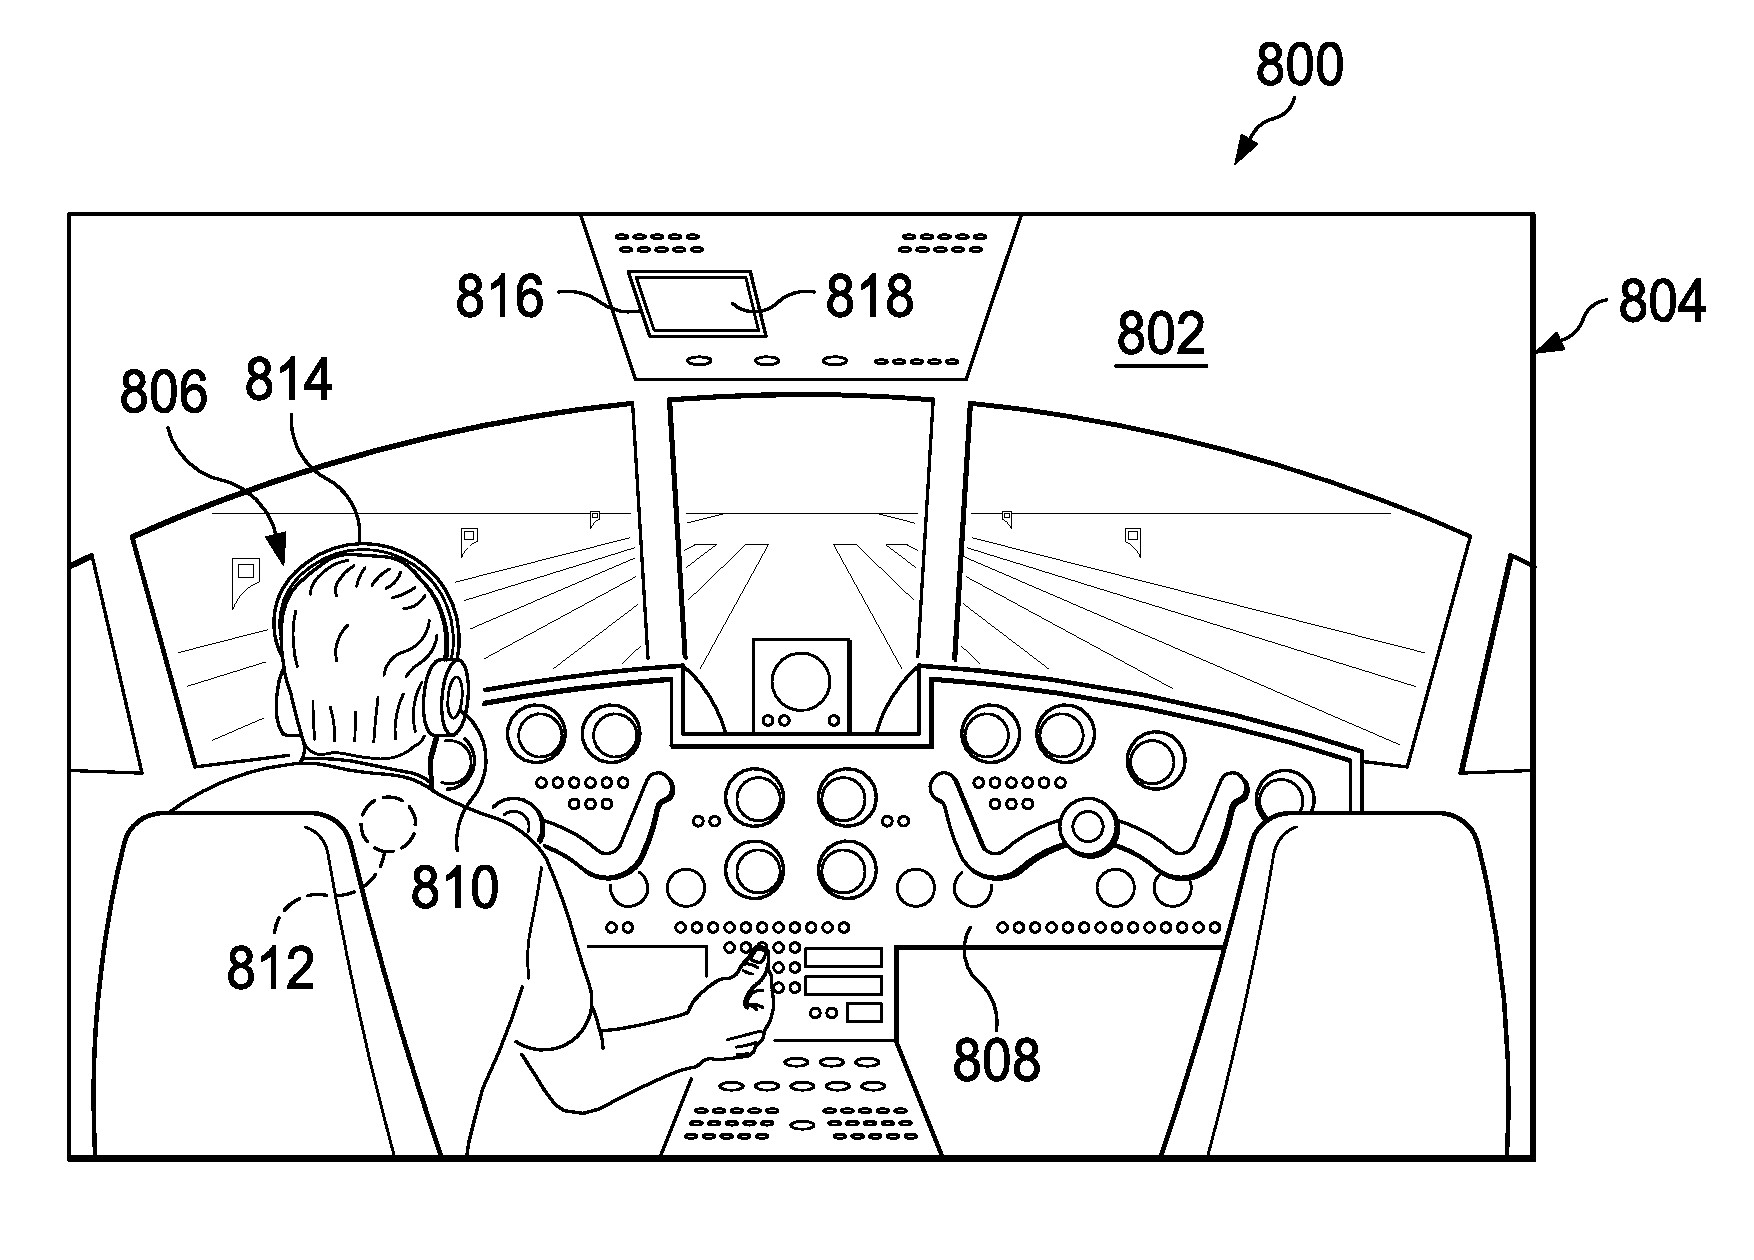 Health monitoring system for a vehicle